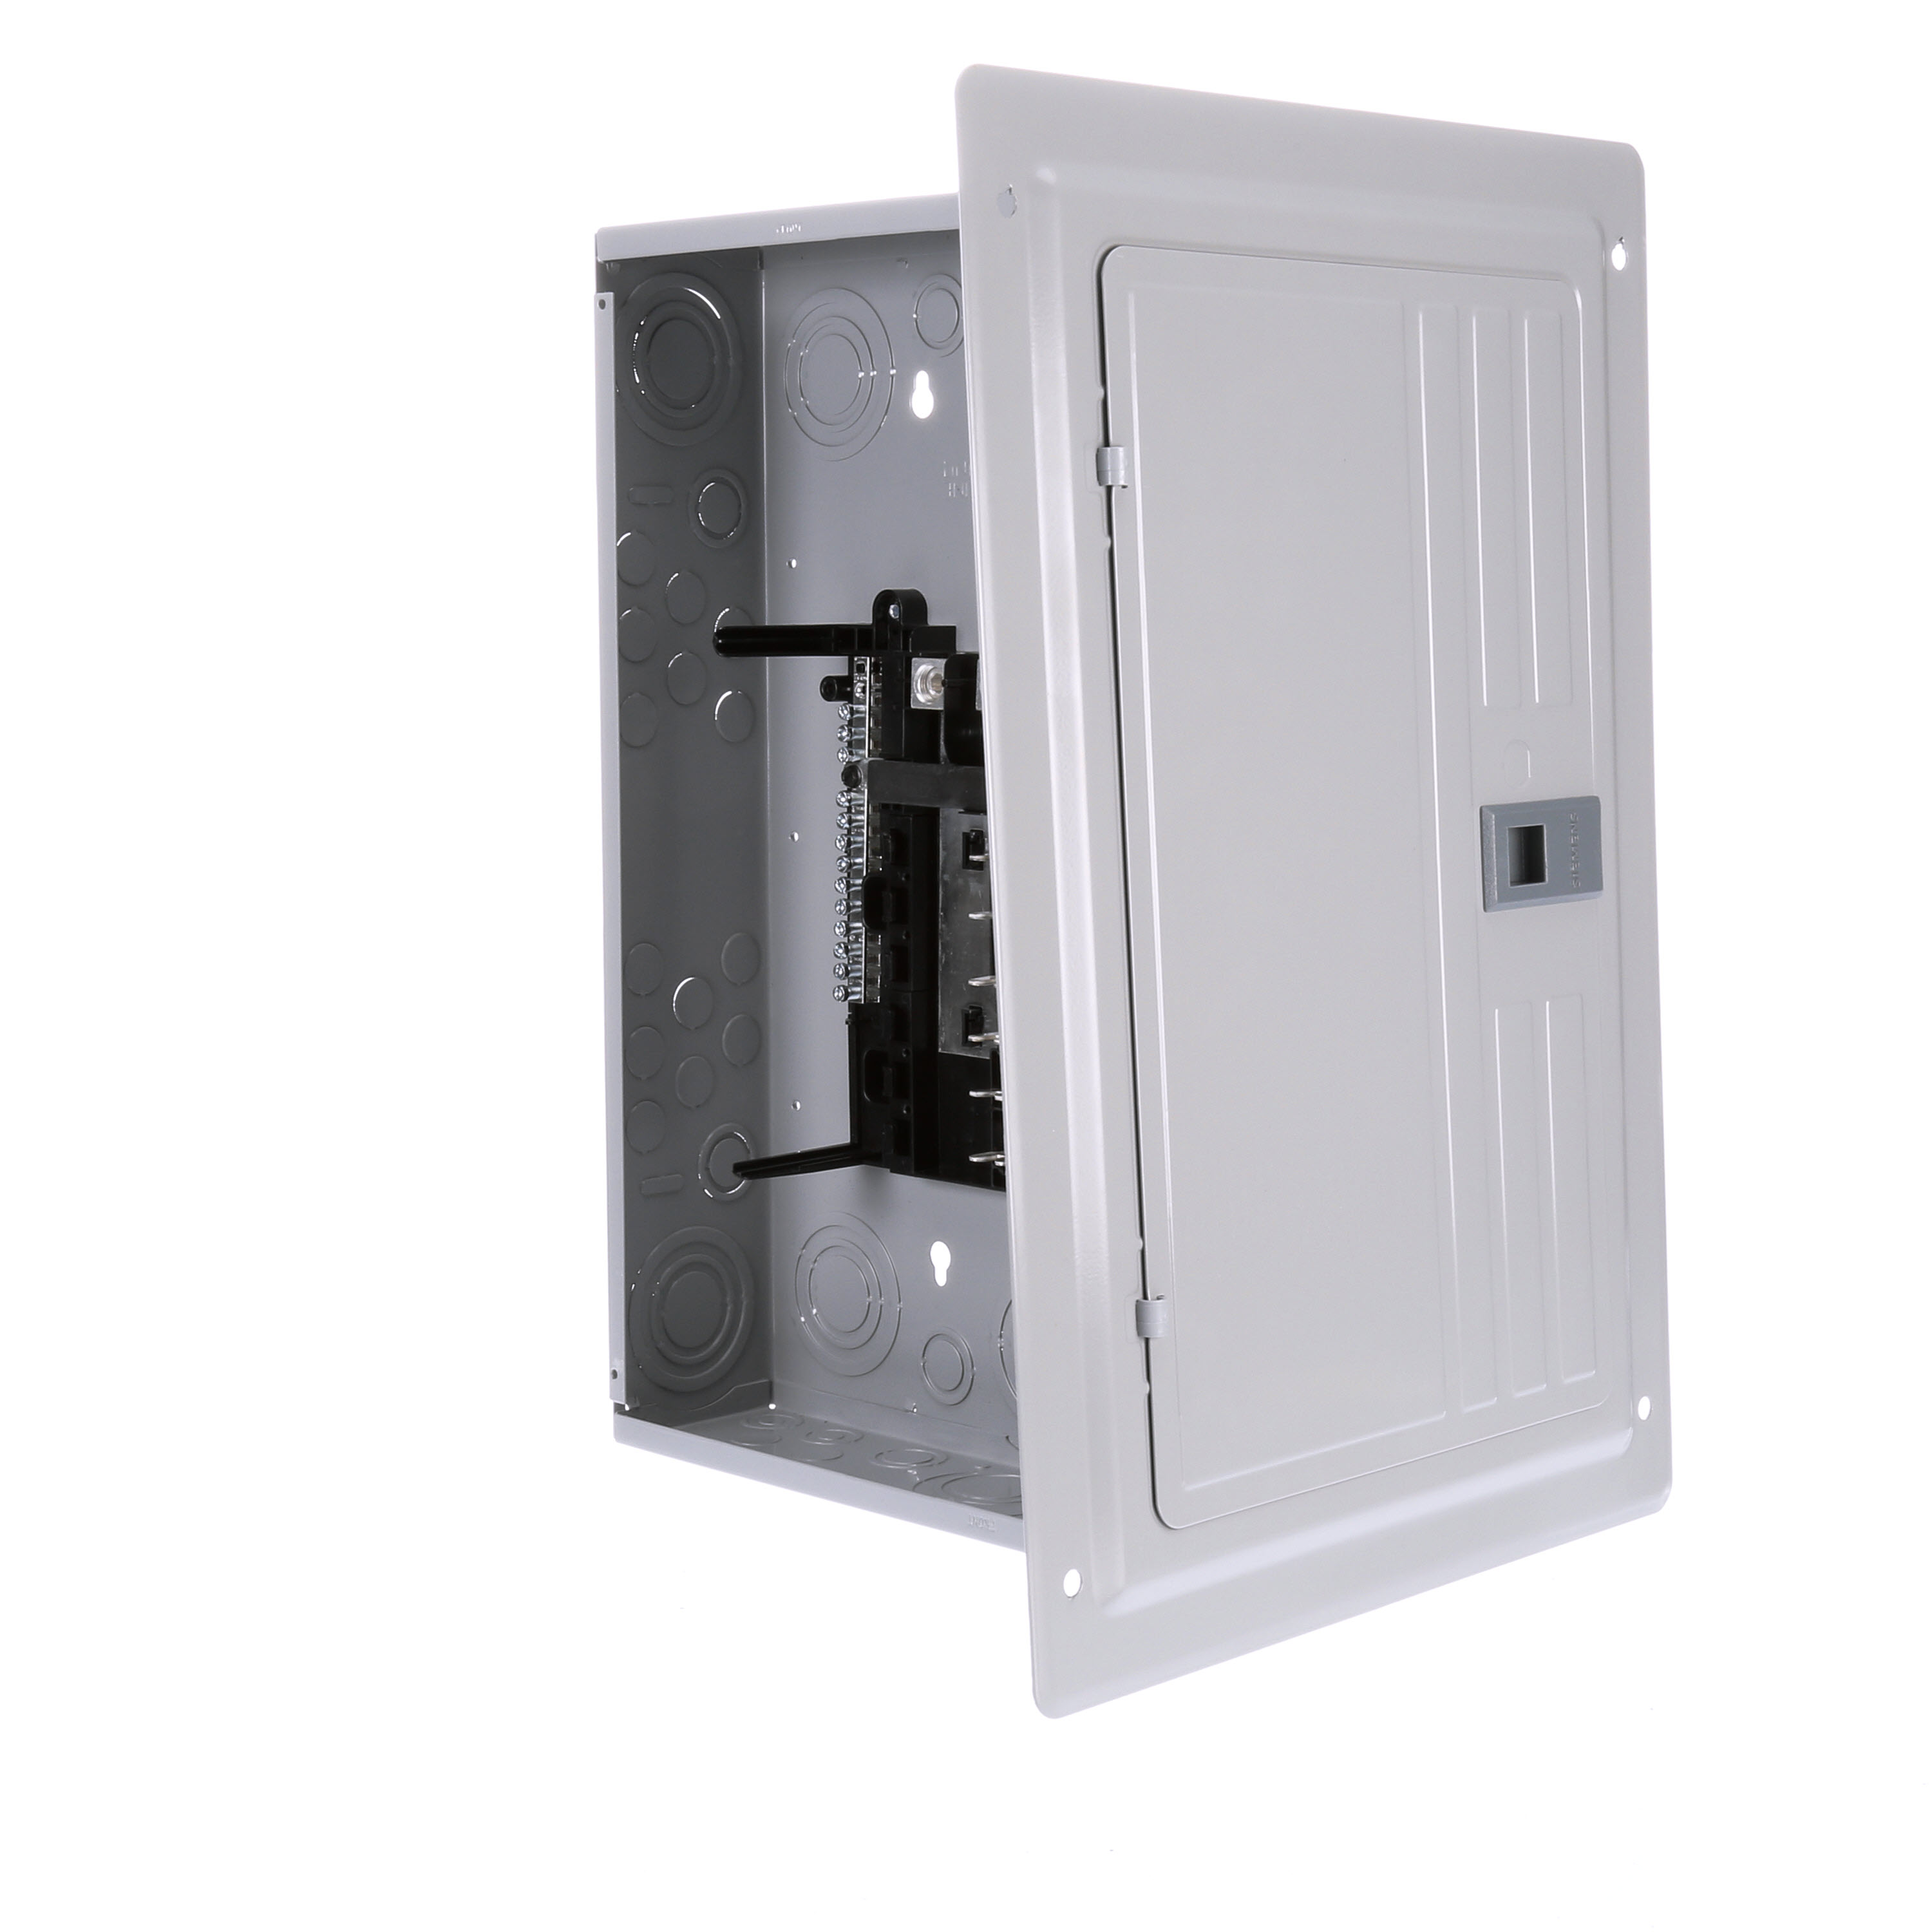 SIEMENS LOW VOLTAGE ES SERIES LOAD CENTER. MAIN LUG WITH 12 1-INCH SPACES ALLOWING MAX 24 CIRCUITS. 3-PHASE 4-WIRE SYSTEM RATED 120/240V OR 120/208V (200A) 100KA INTERRUPT. SPECIAL FEATURES ALUMINUM BUS, GRAY TRIM, NEMA TYPE1 ENCLOSURE FORINDOOR USE.